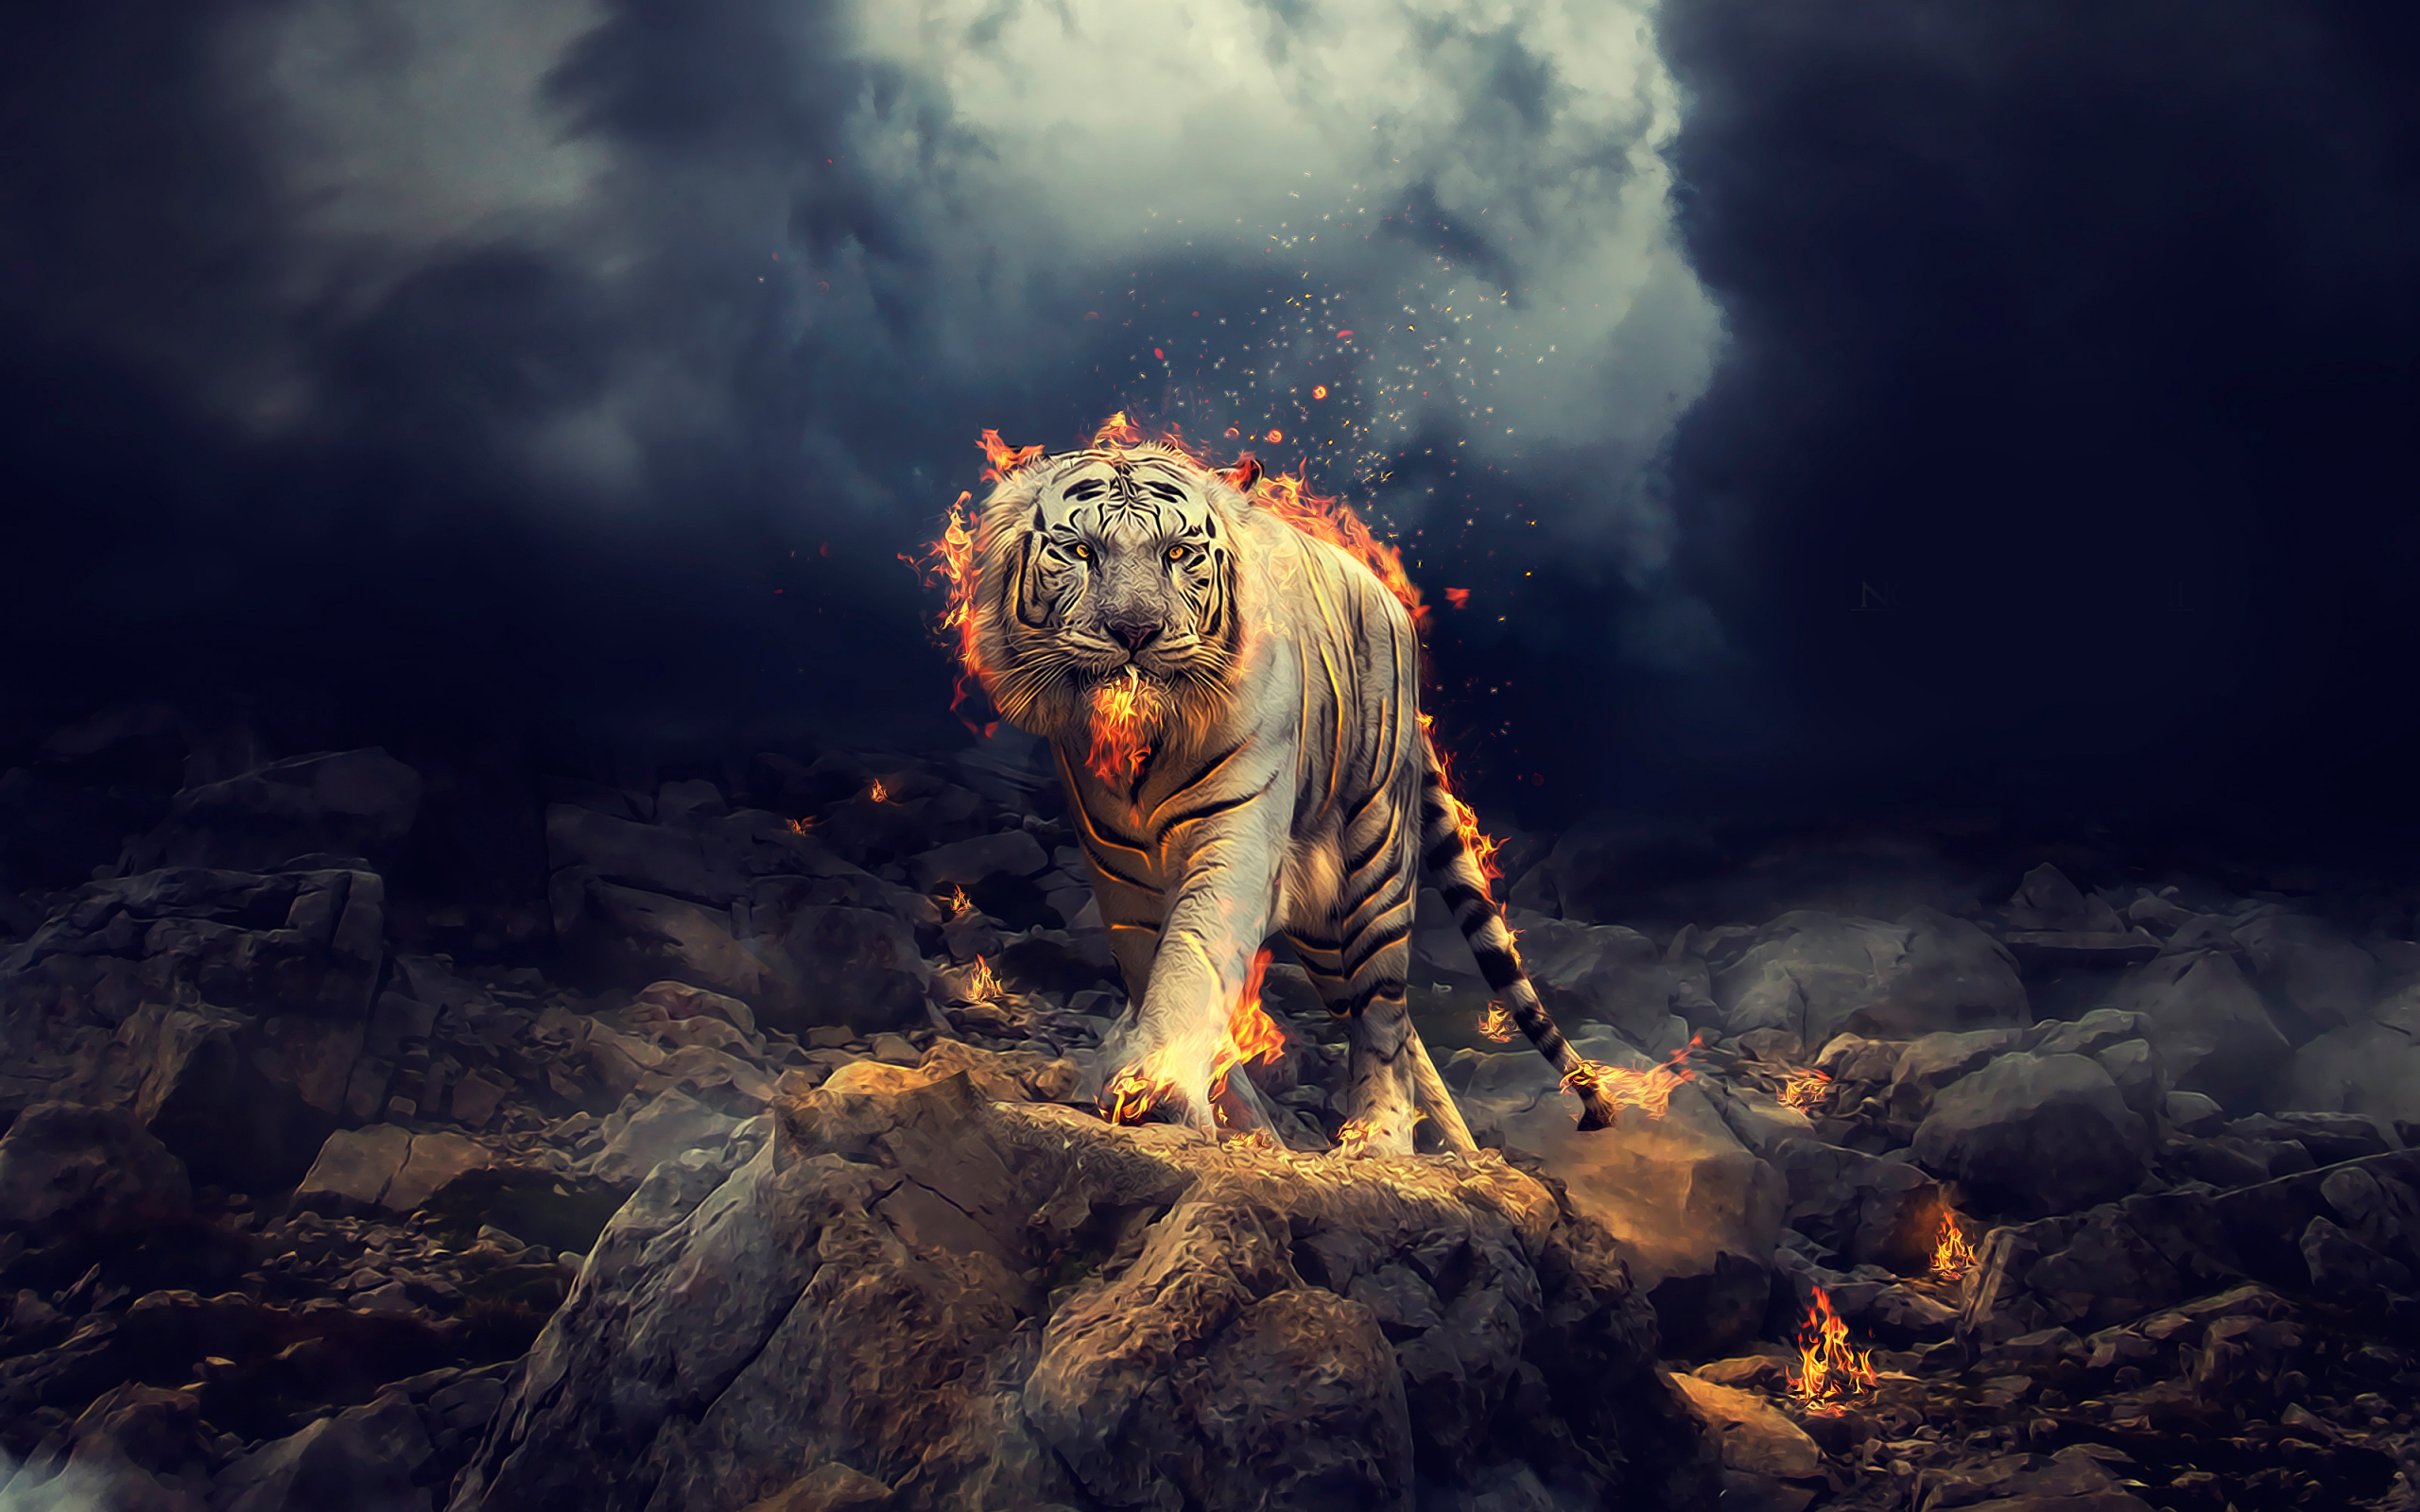 2560x1600 Download angry, raging, white tiger wallpaper, dual wide 16:10 hd image, background, 10608